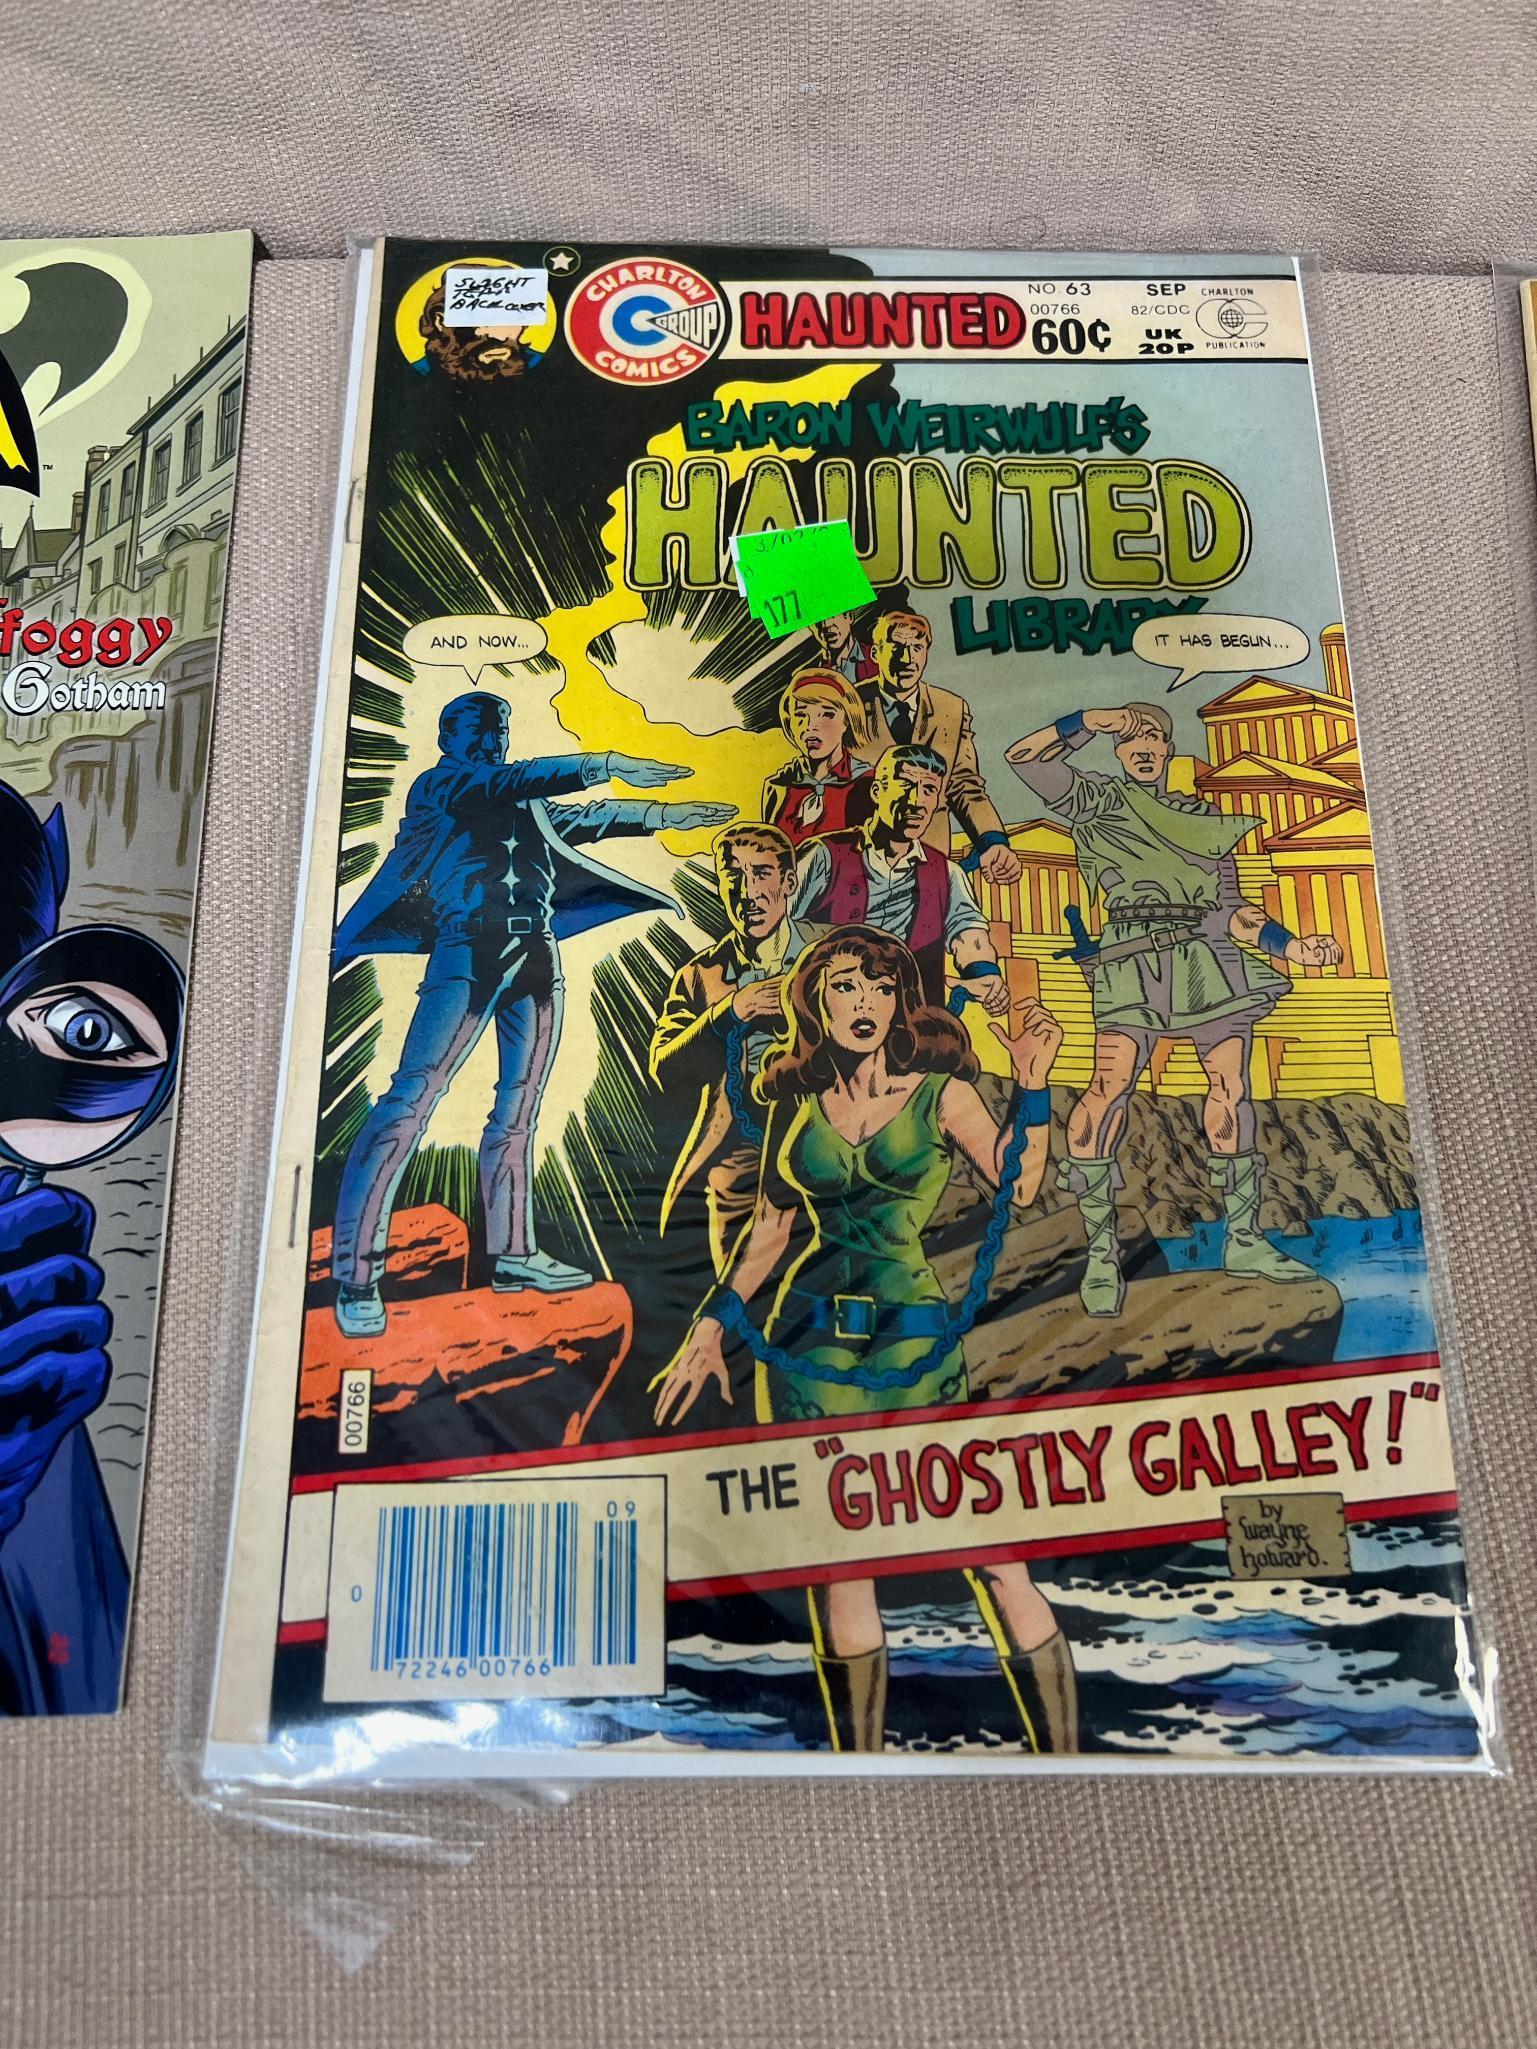 7- Older comics, Nightwatch, Batman, Haunted Library, Creepy Things and more